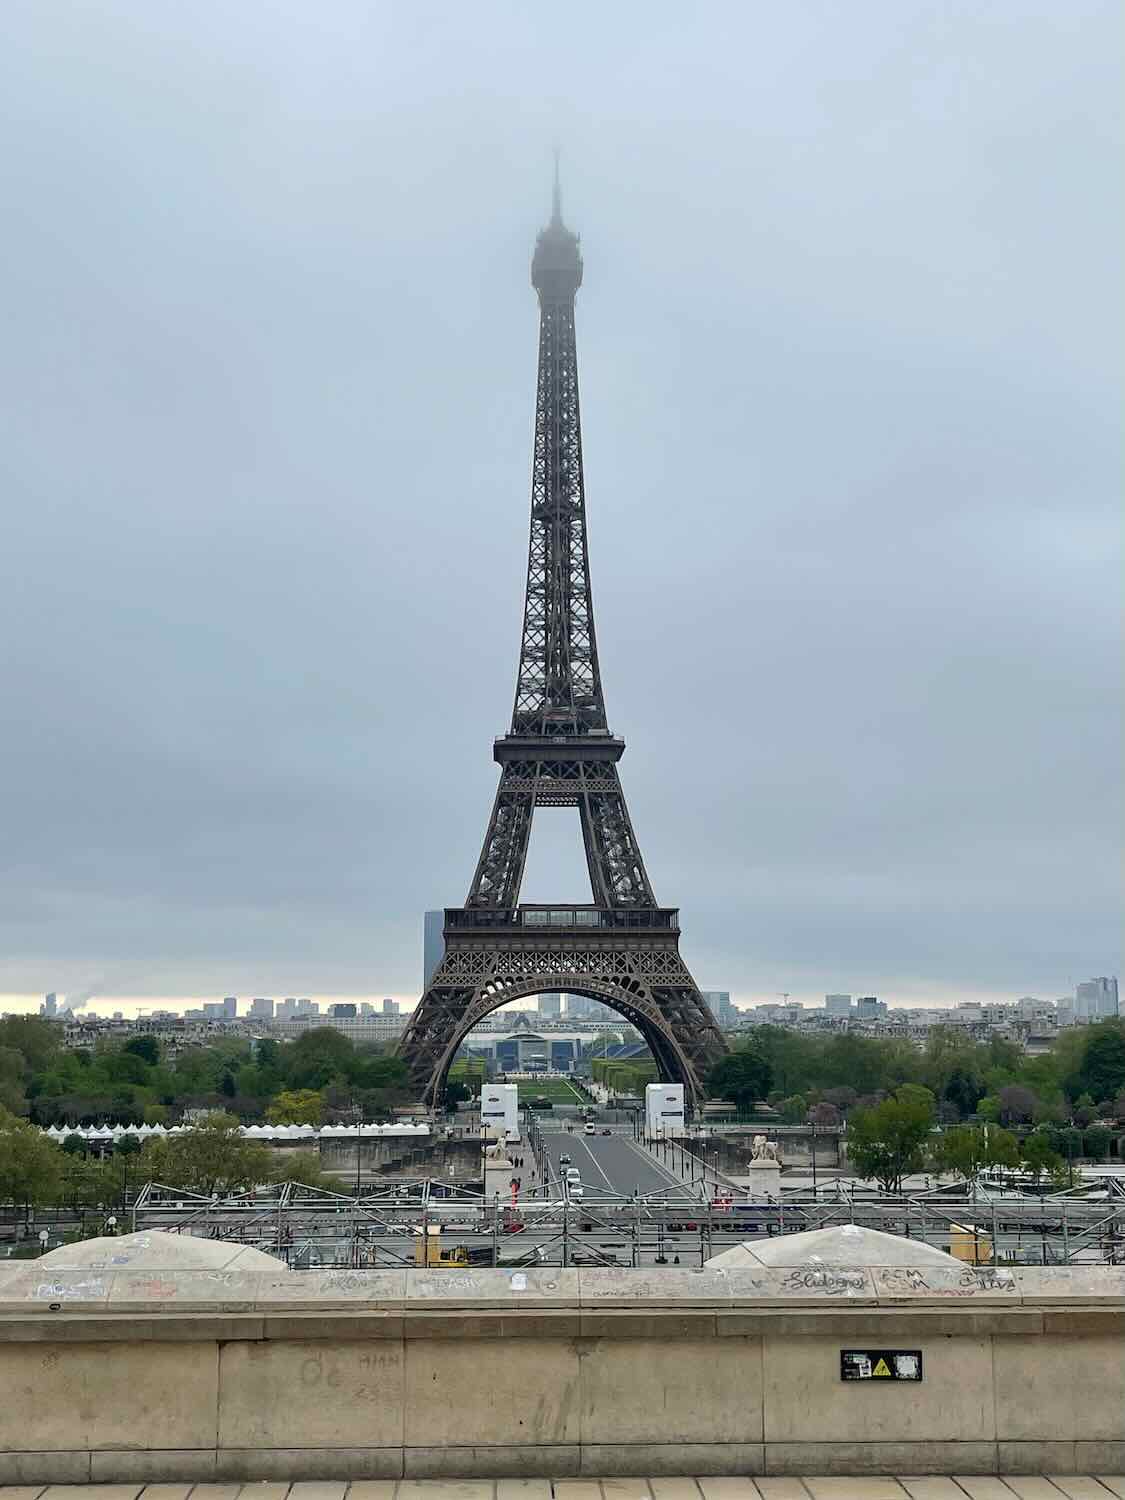 A view of the Eiffel Tower on a cloudy day, with its top partially obscured by mist. The foreground shows the plaza area with minimal foot traffic.